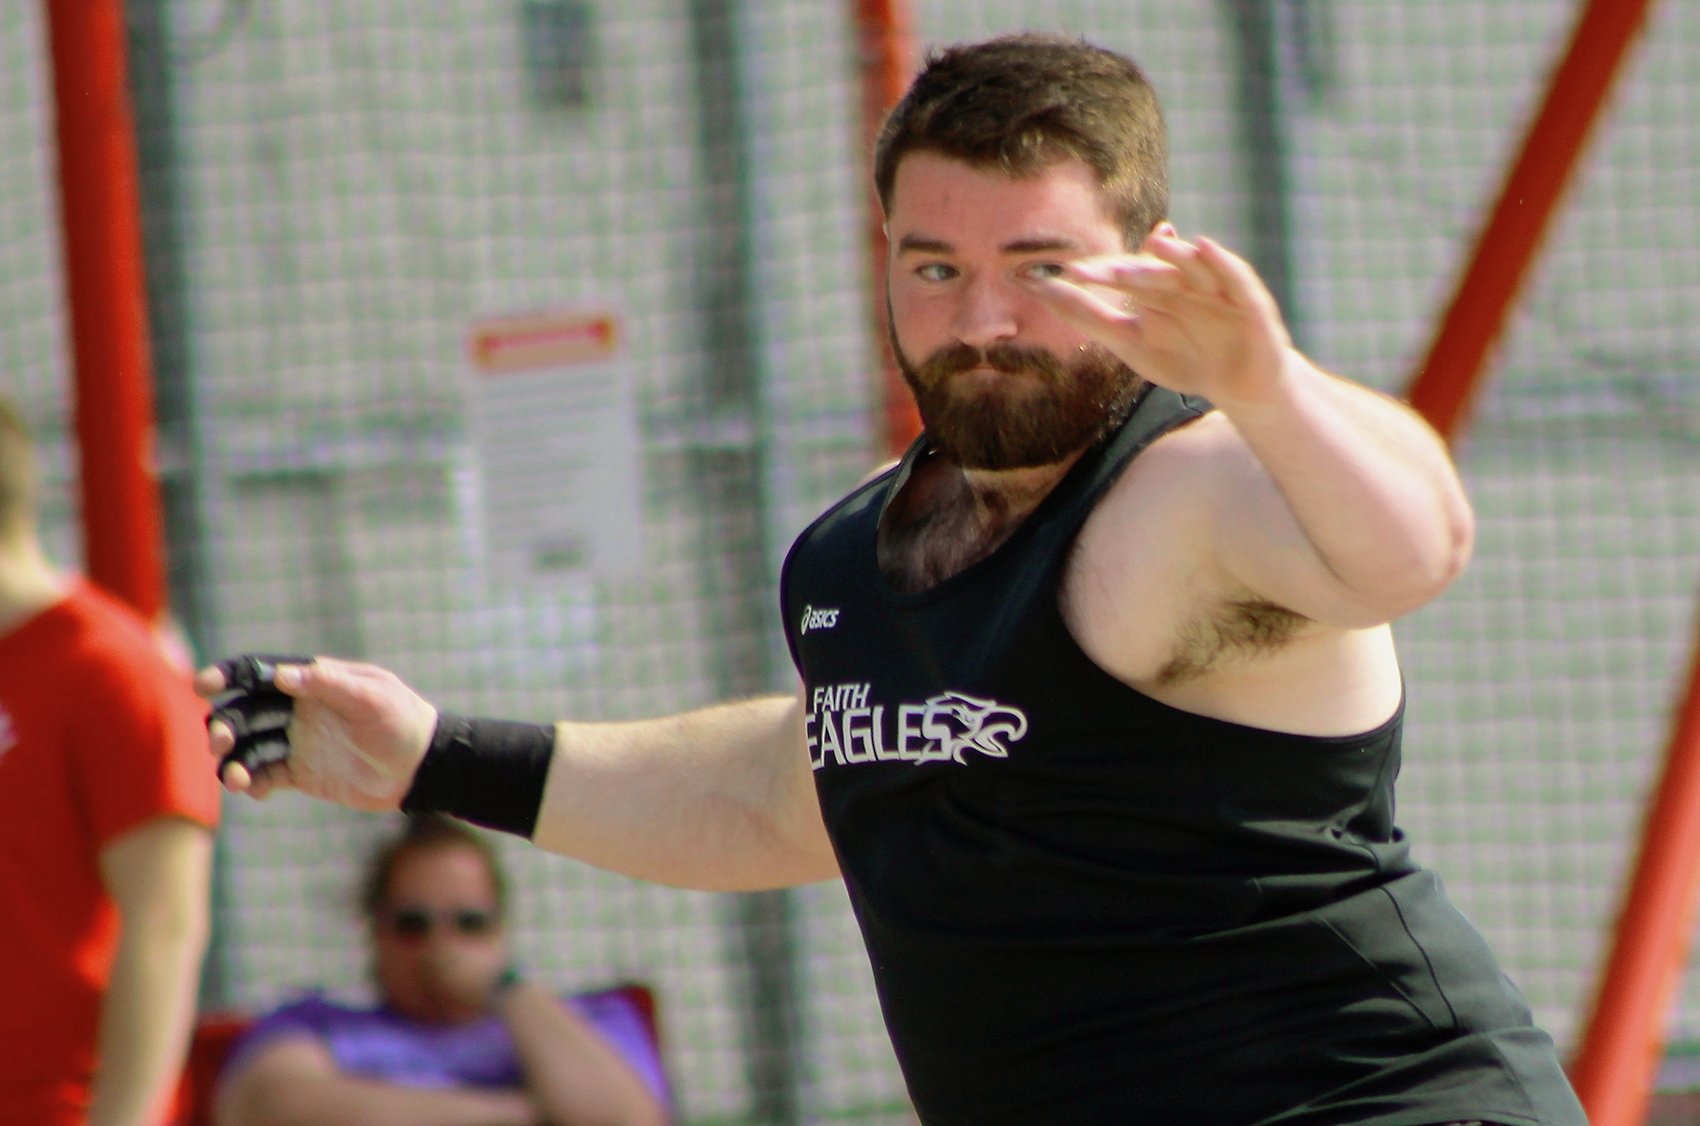 Jacob Kirkwood broke the Faith Eagles' school record with his discus throw of 46.95m